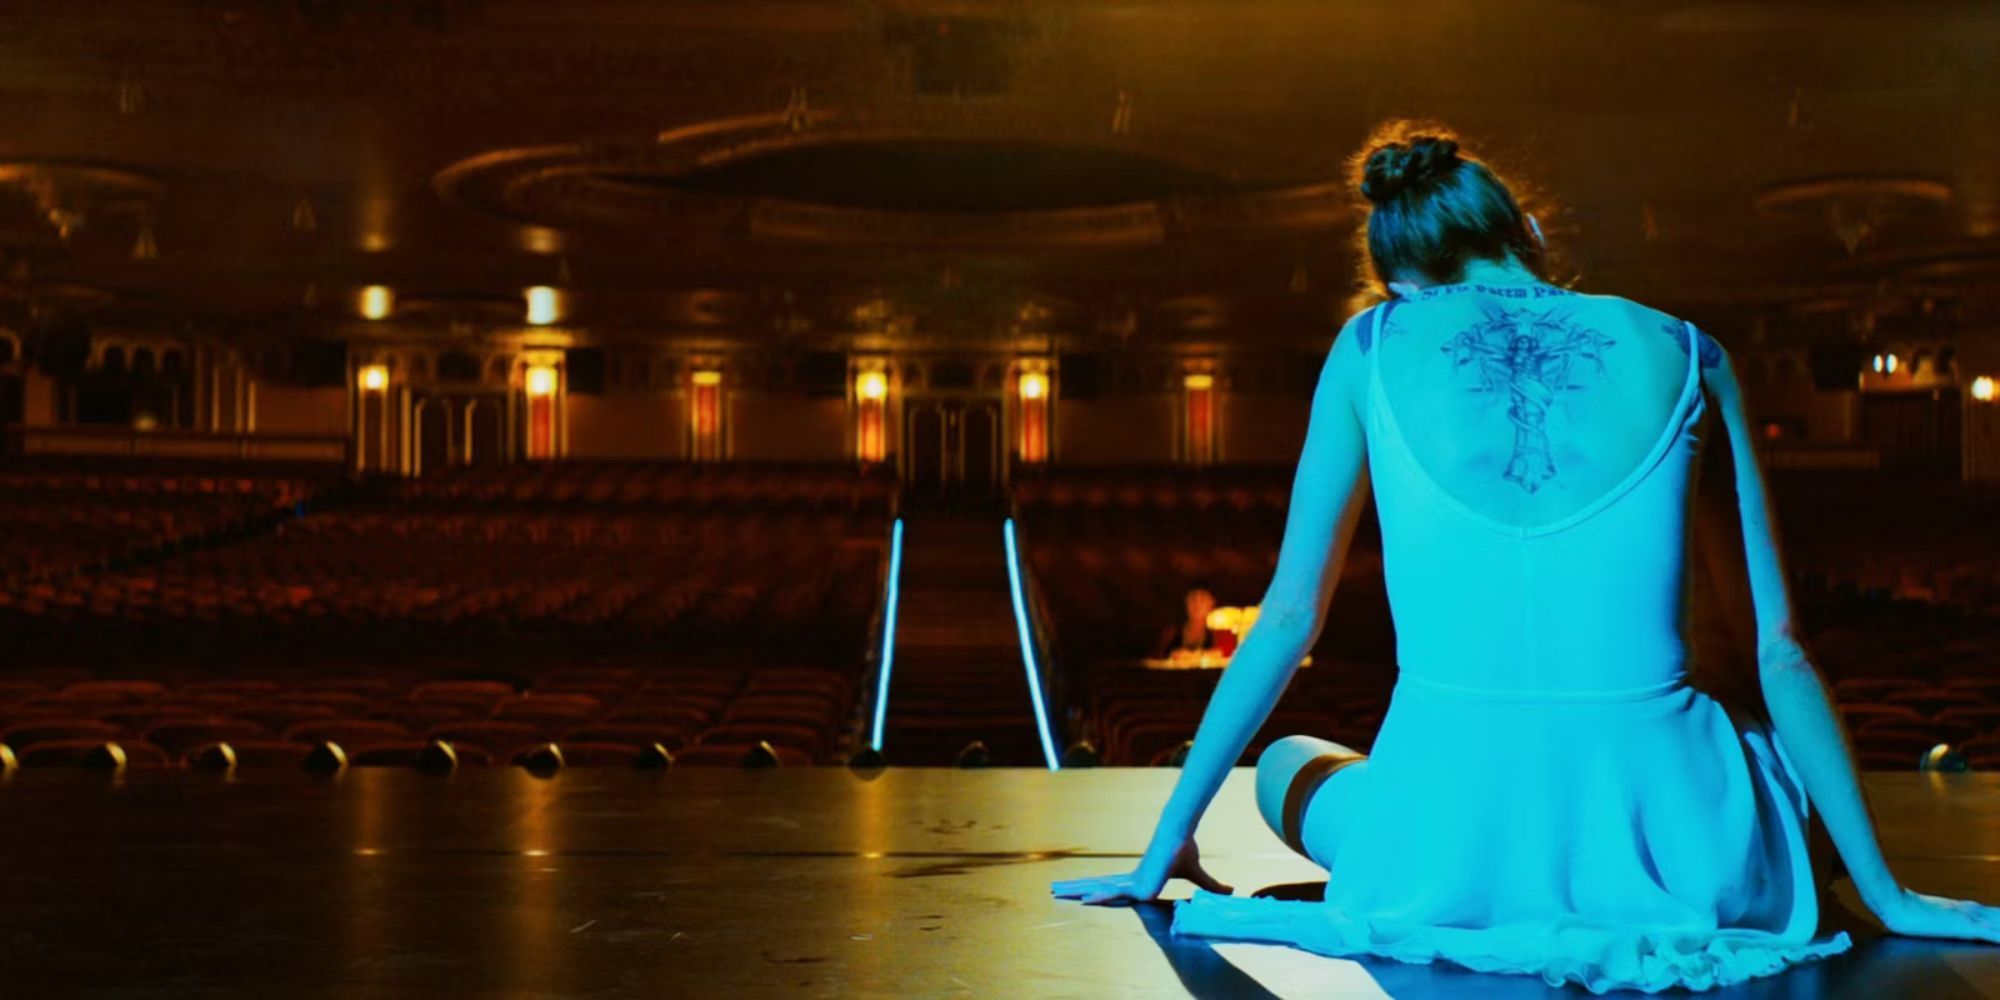 Unity Phelan as The Ballerina sits on the stage in John Wick: Chapter 3 - Parabellum.